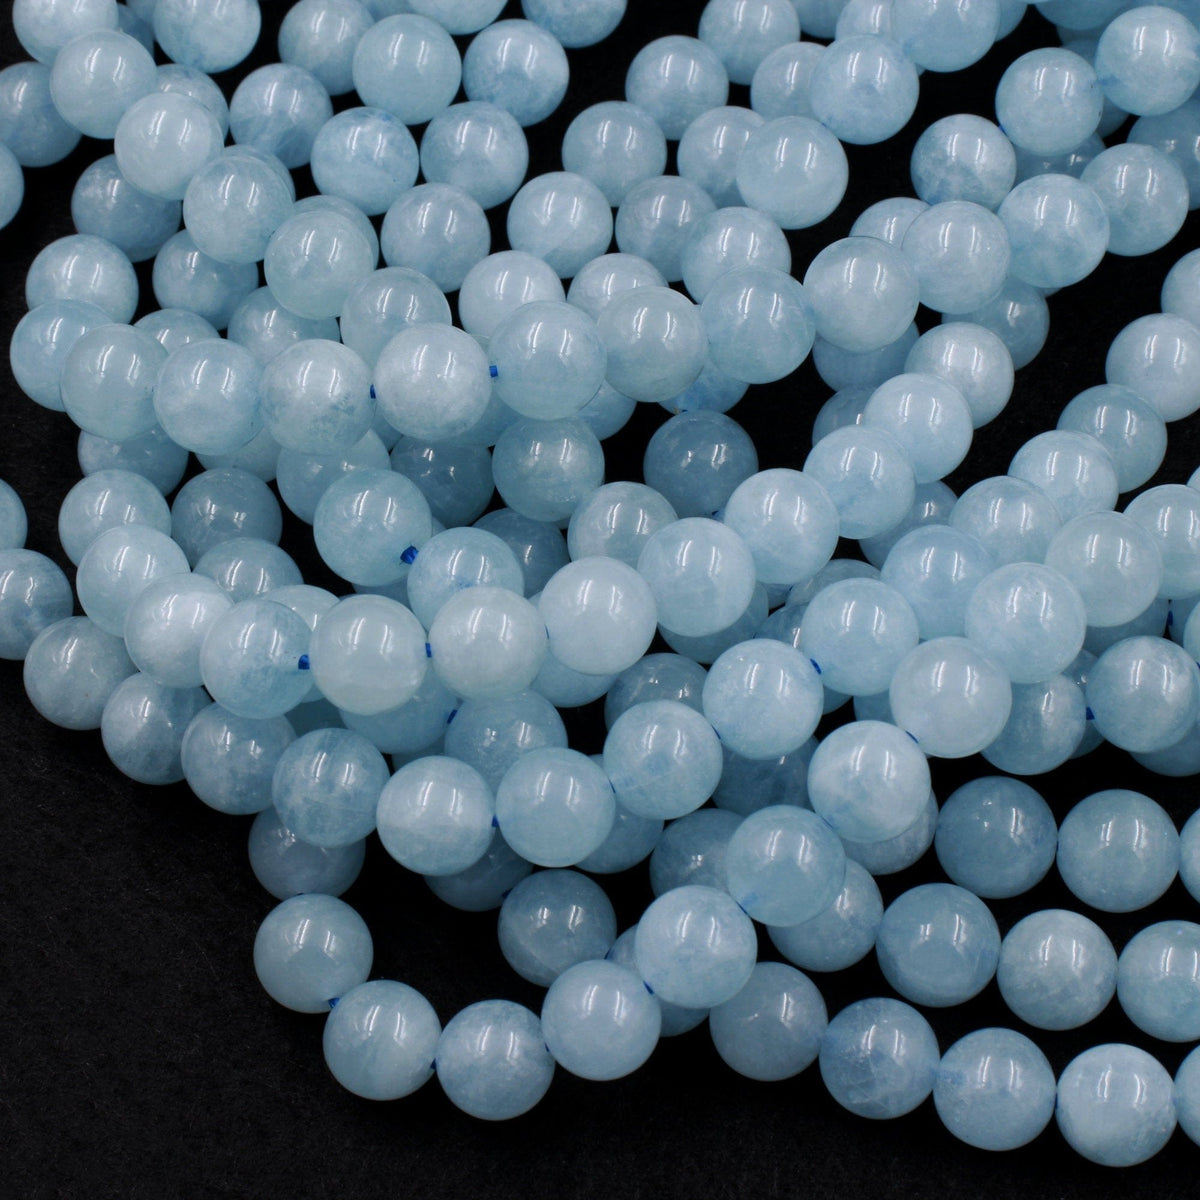 4mm Matte White Marble Beads 16 inch Strand 15137